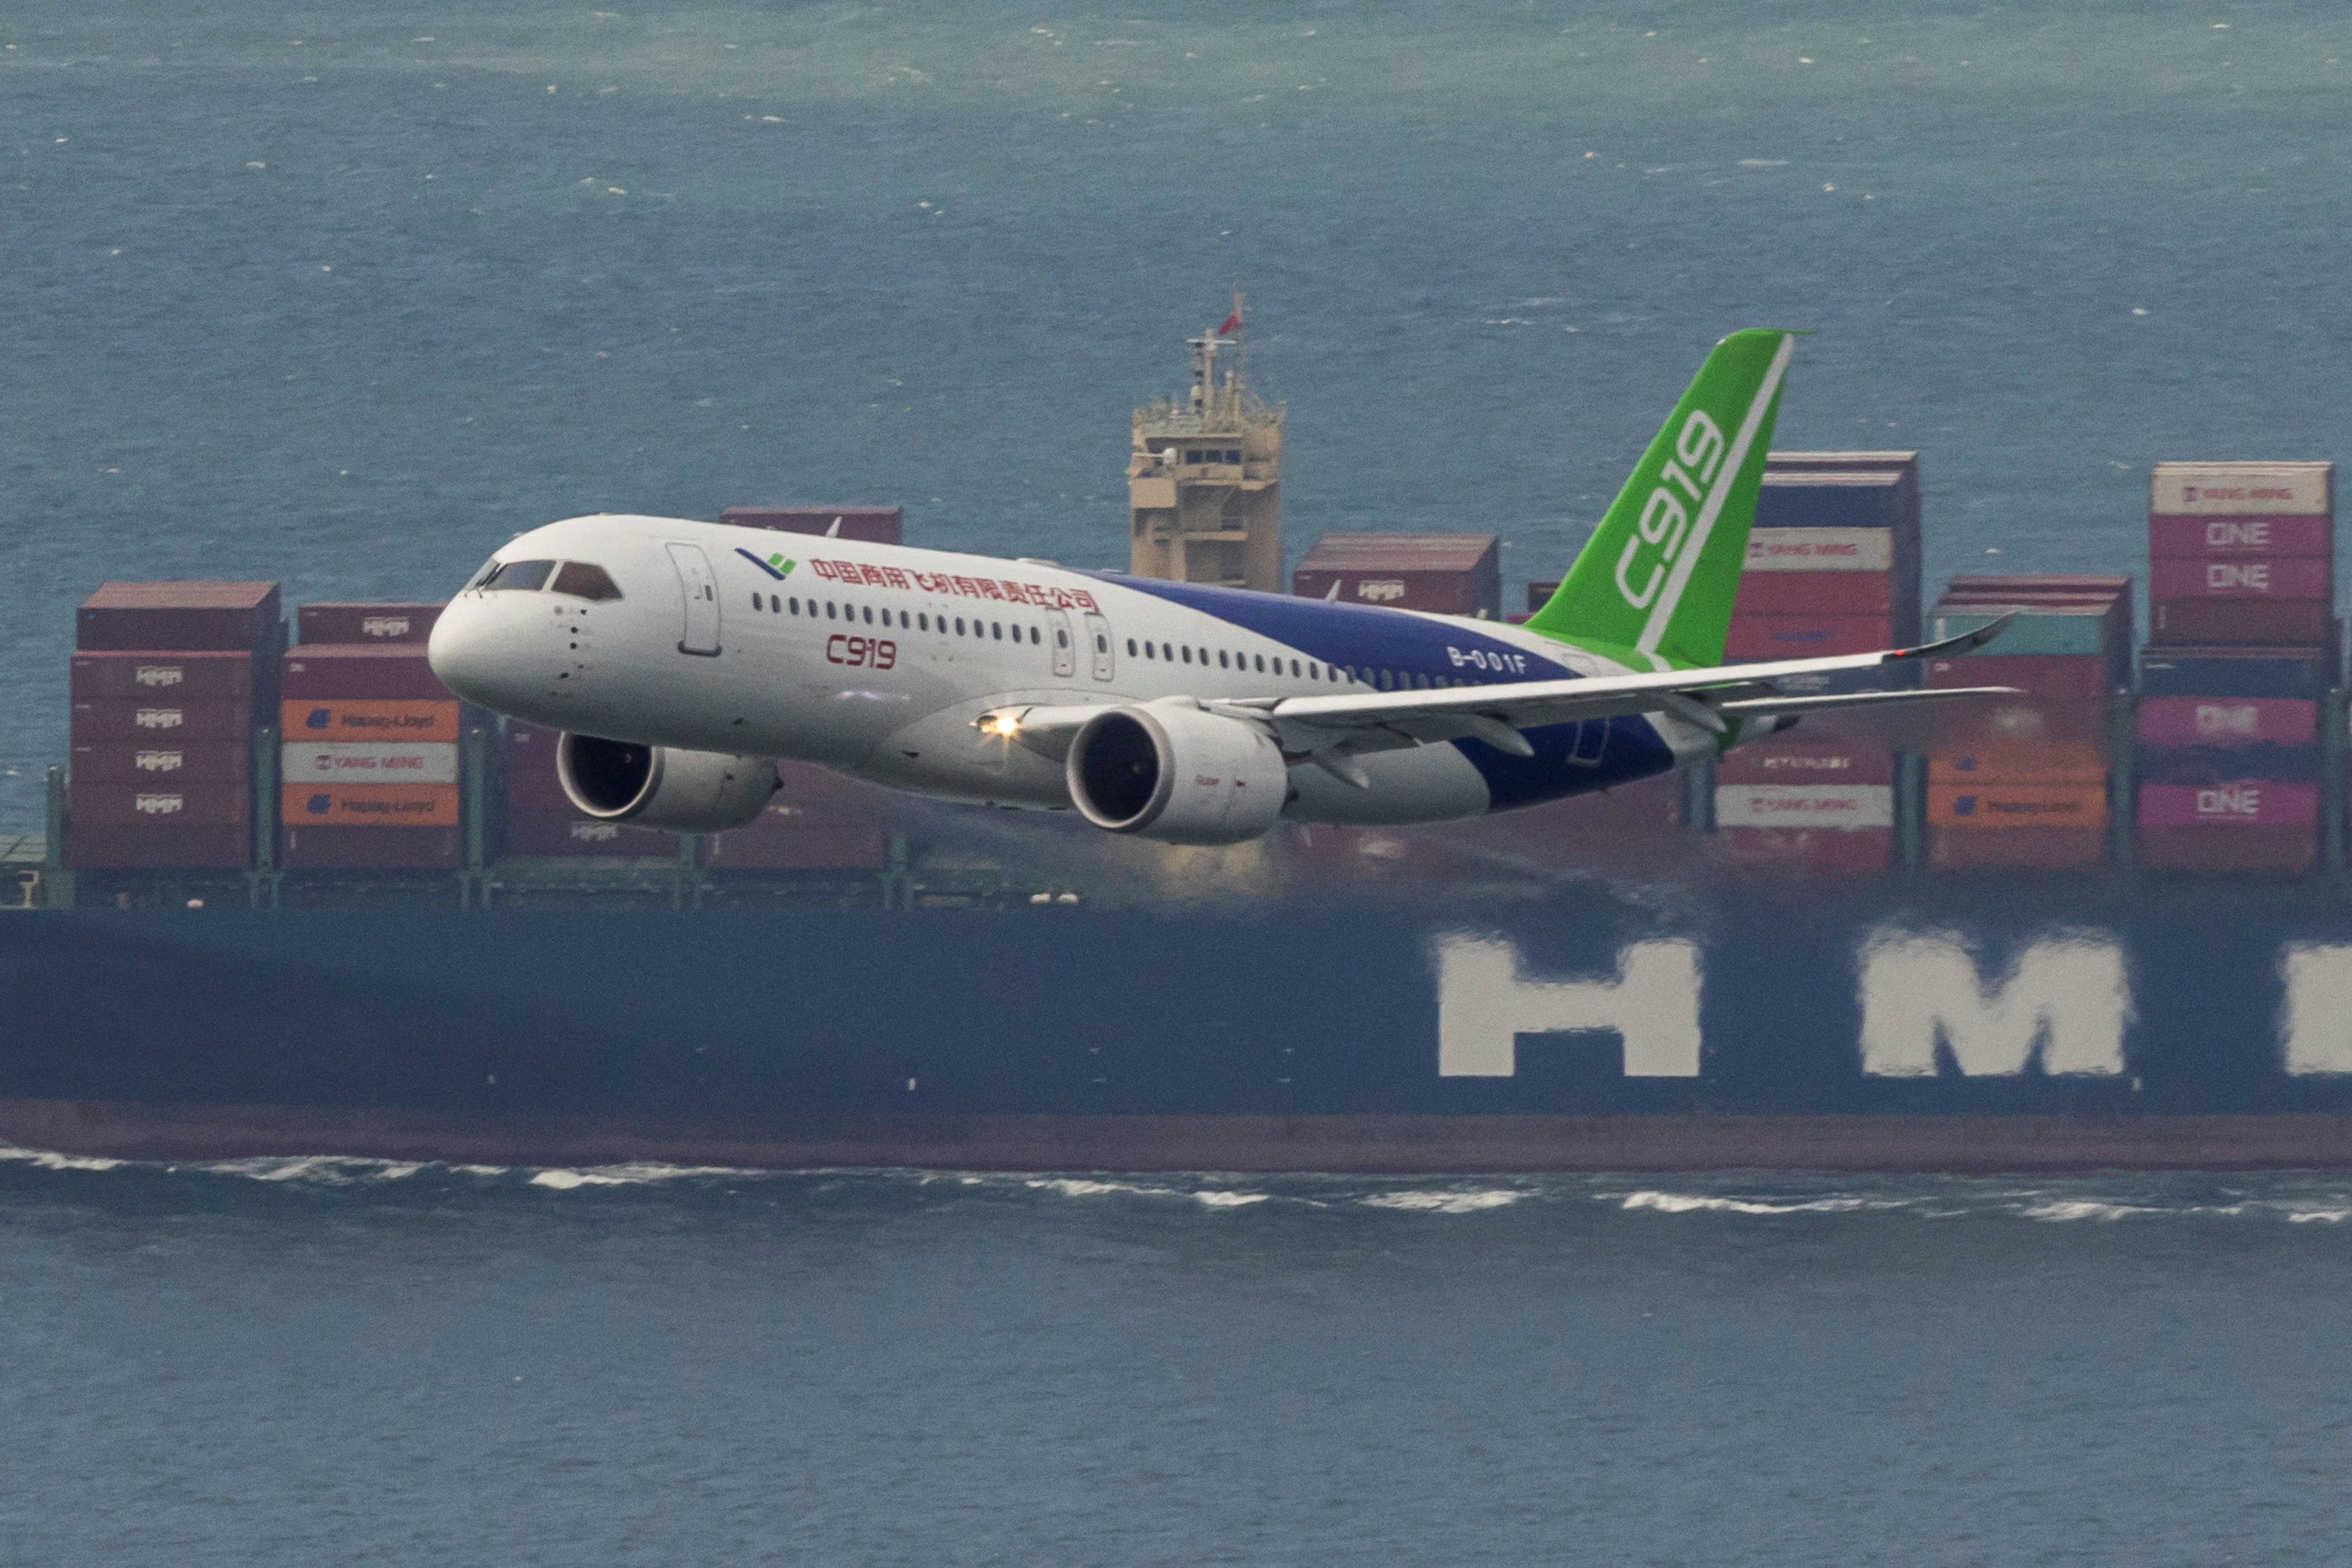 The C919 made its maiden commercial flight in May, but has only been certified by the China’s regulator. Photo: Reuters